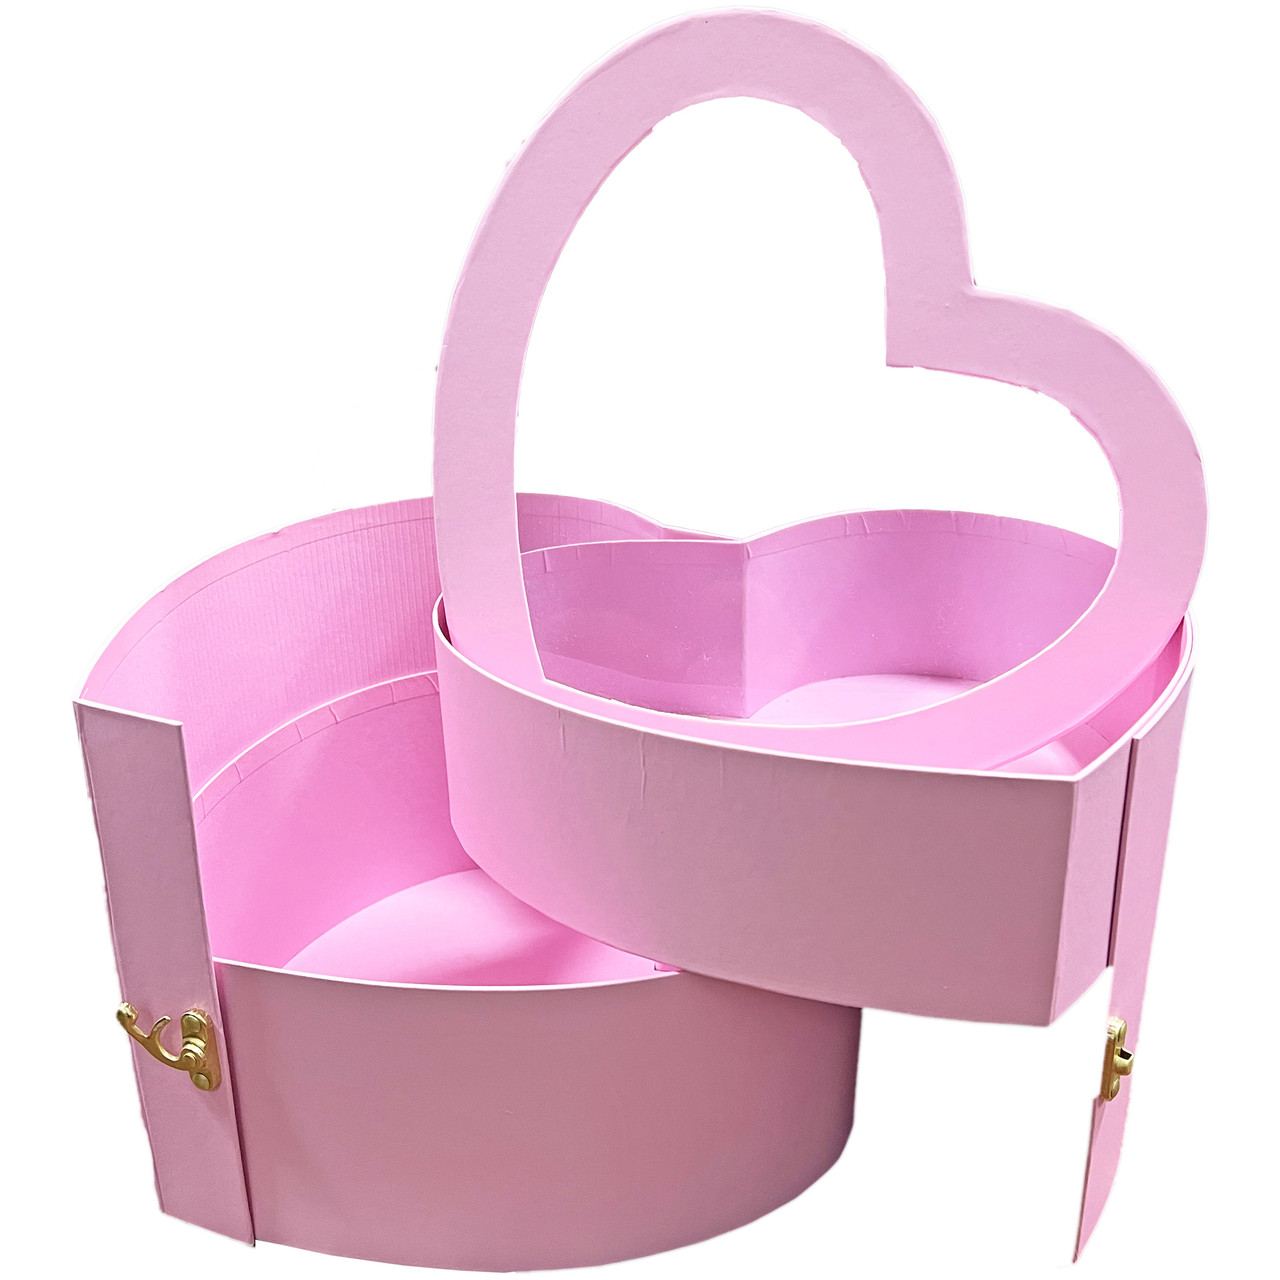 Double Layer Heart Shape Box for Flowers with Lids